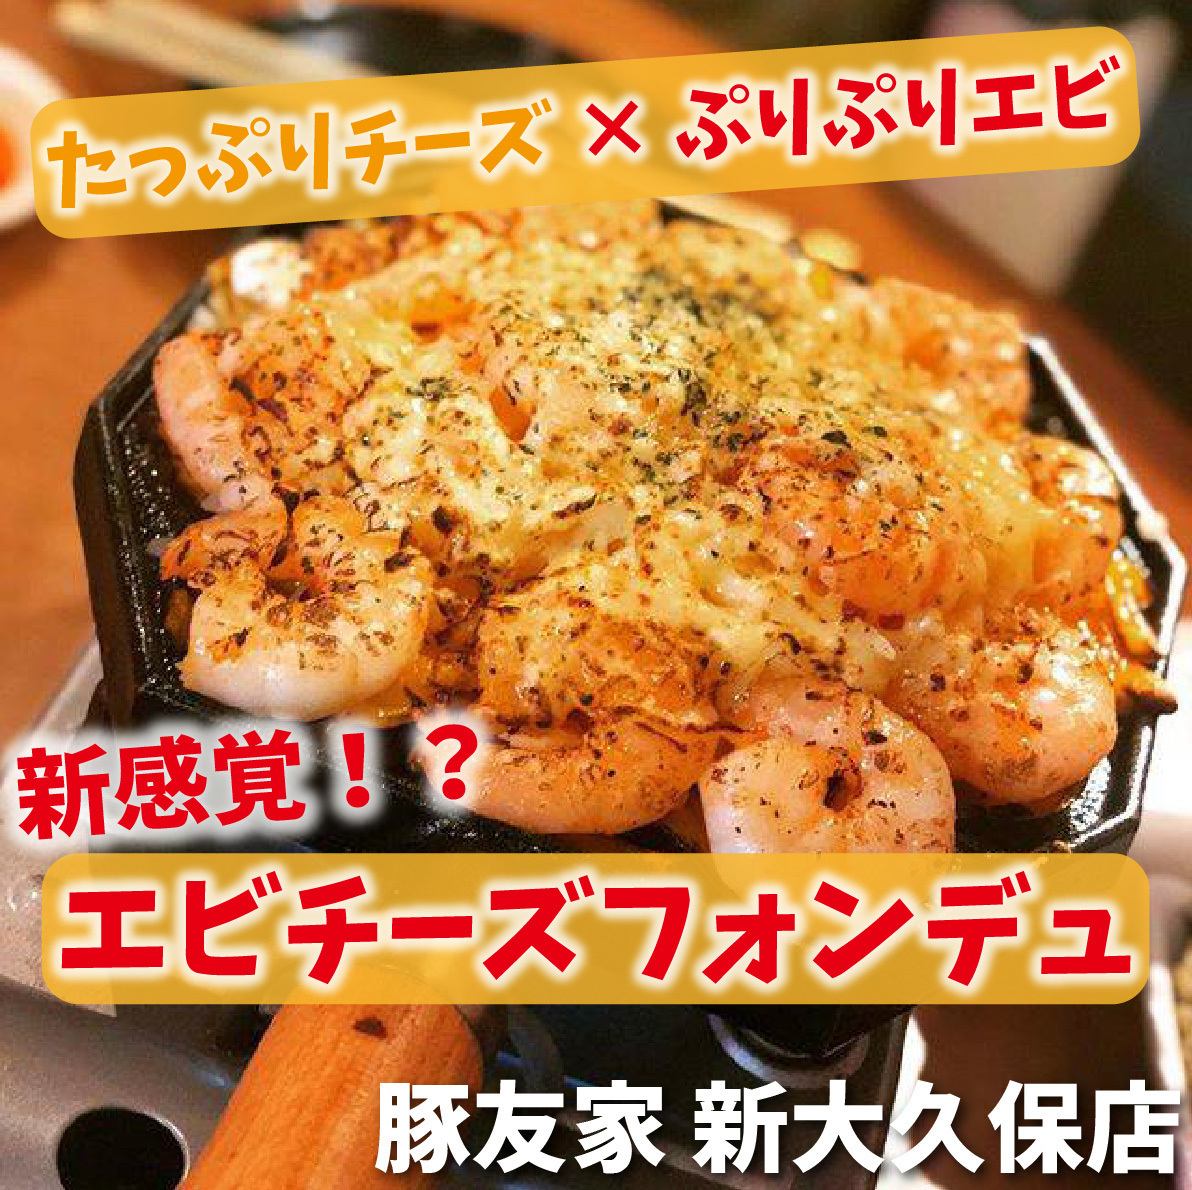 A highly recommended menu item that has become a hot topic!! It was broadcast on Nippon TV's "Shuichi"!